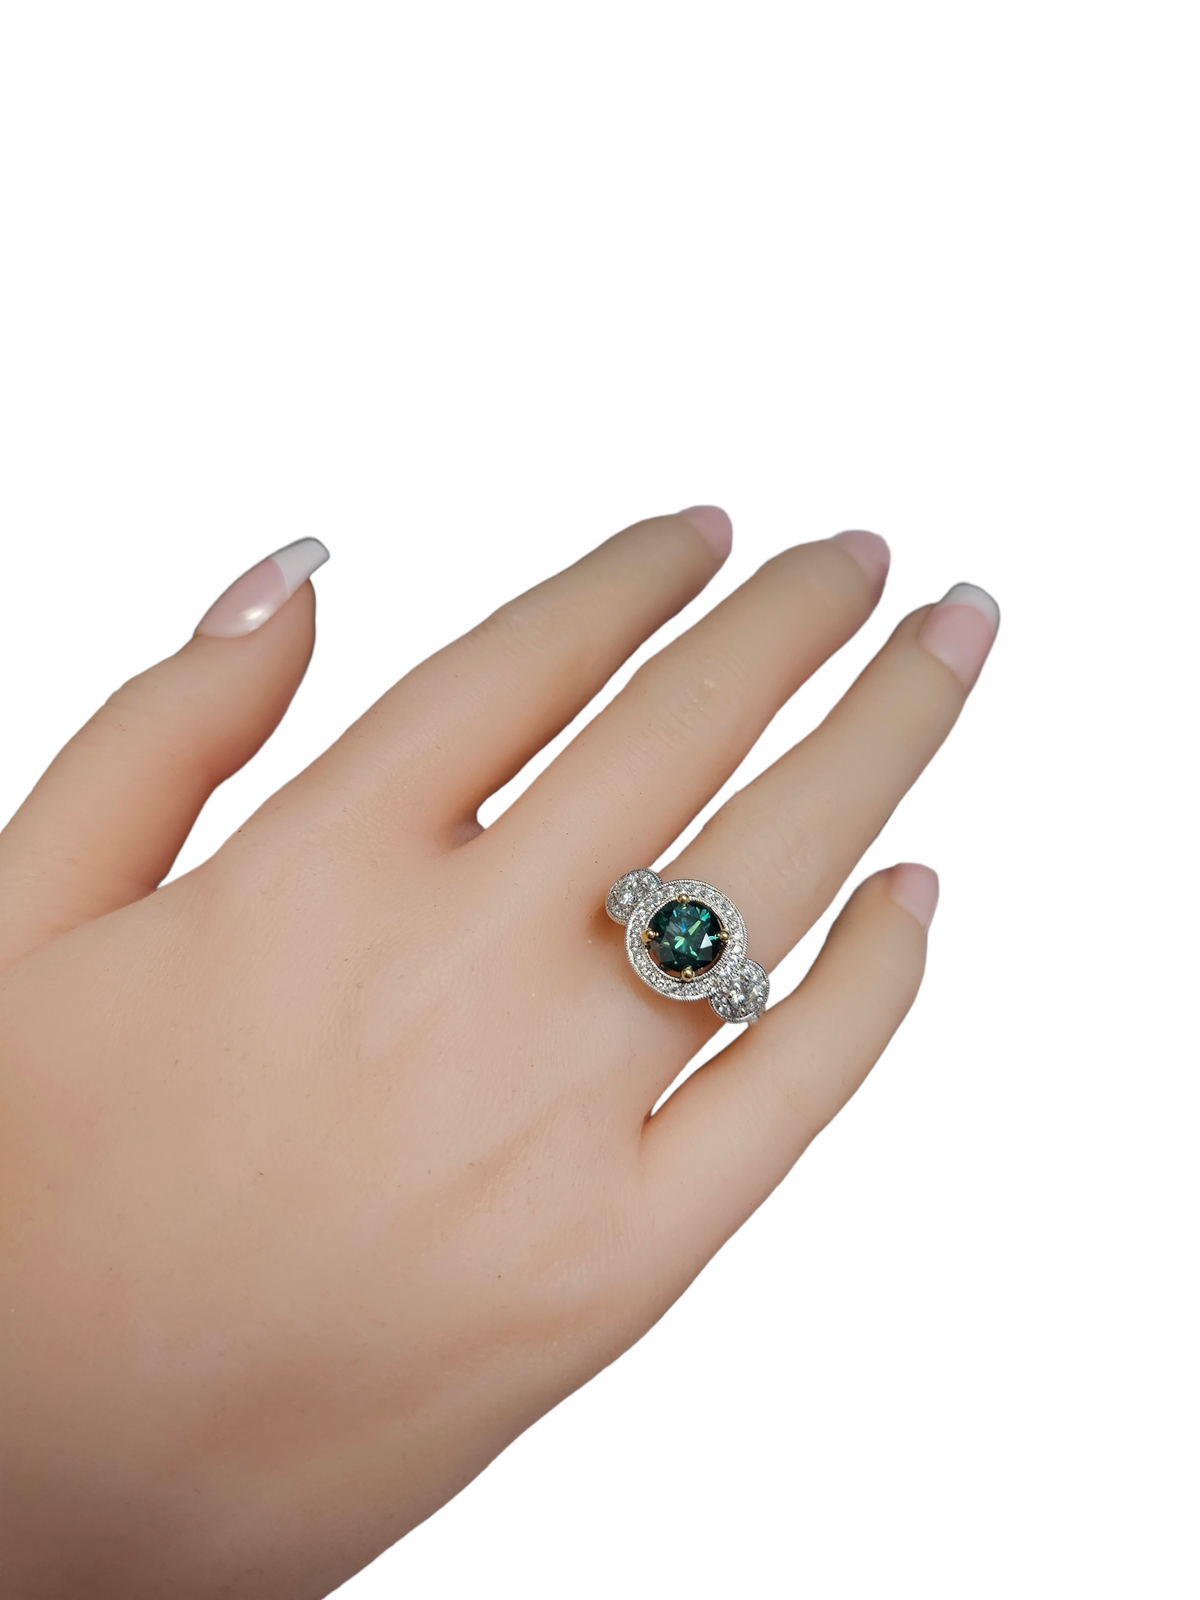 18Kt White Gold and Green and White Diamond Ring